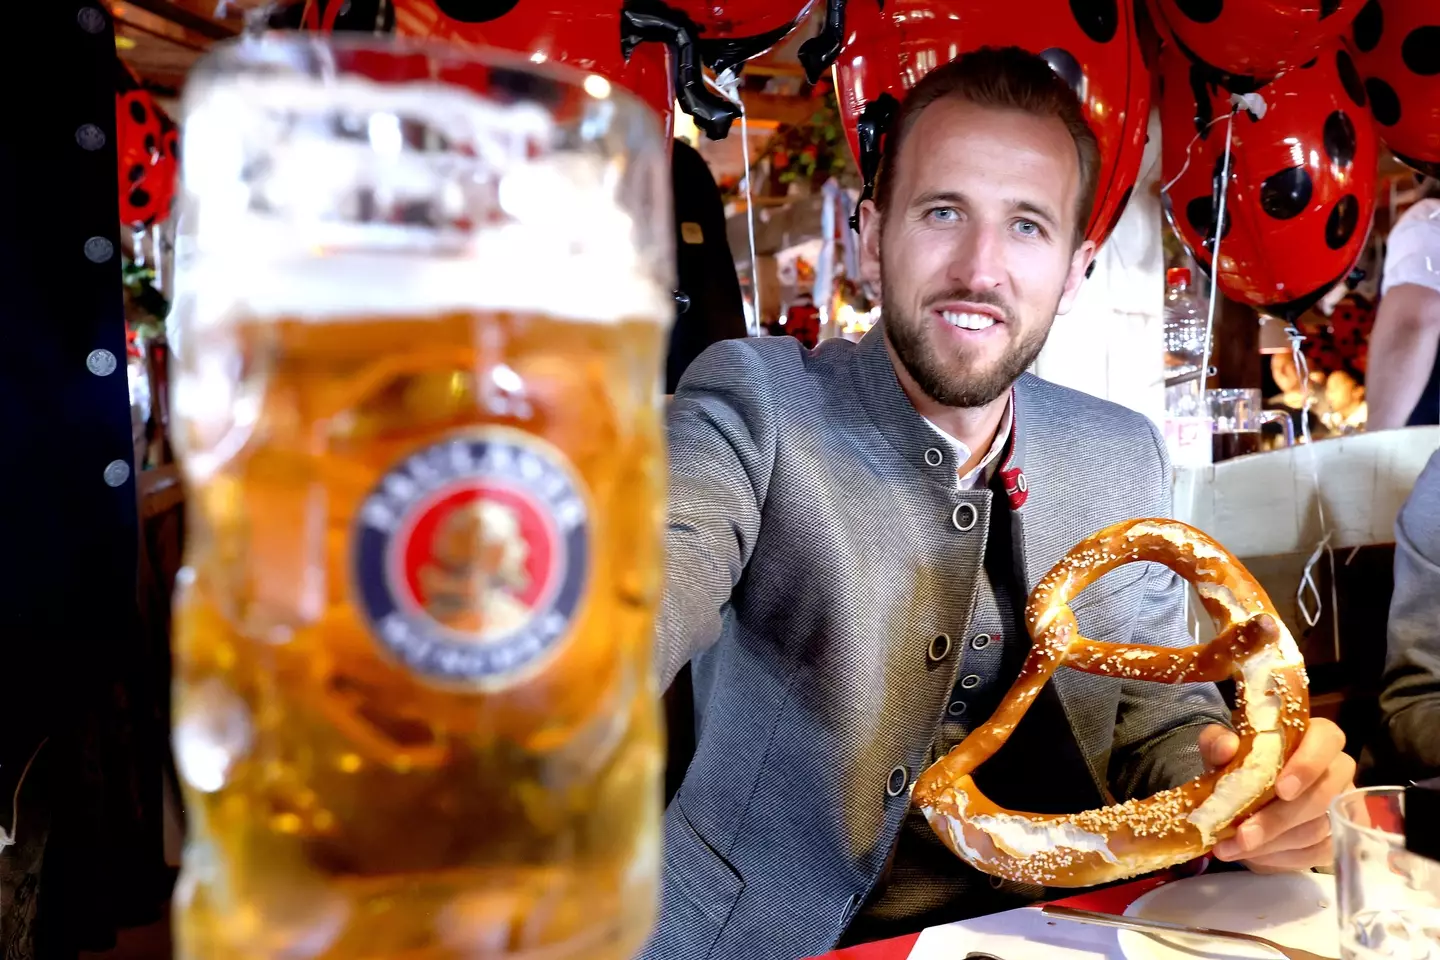 Harry Kane left Spurs this summer to move to Bayern Munich. (